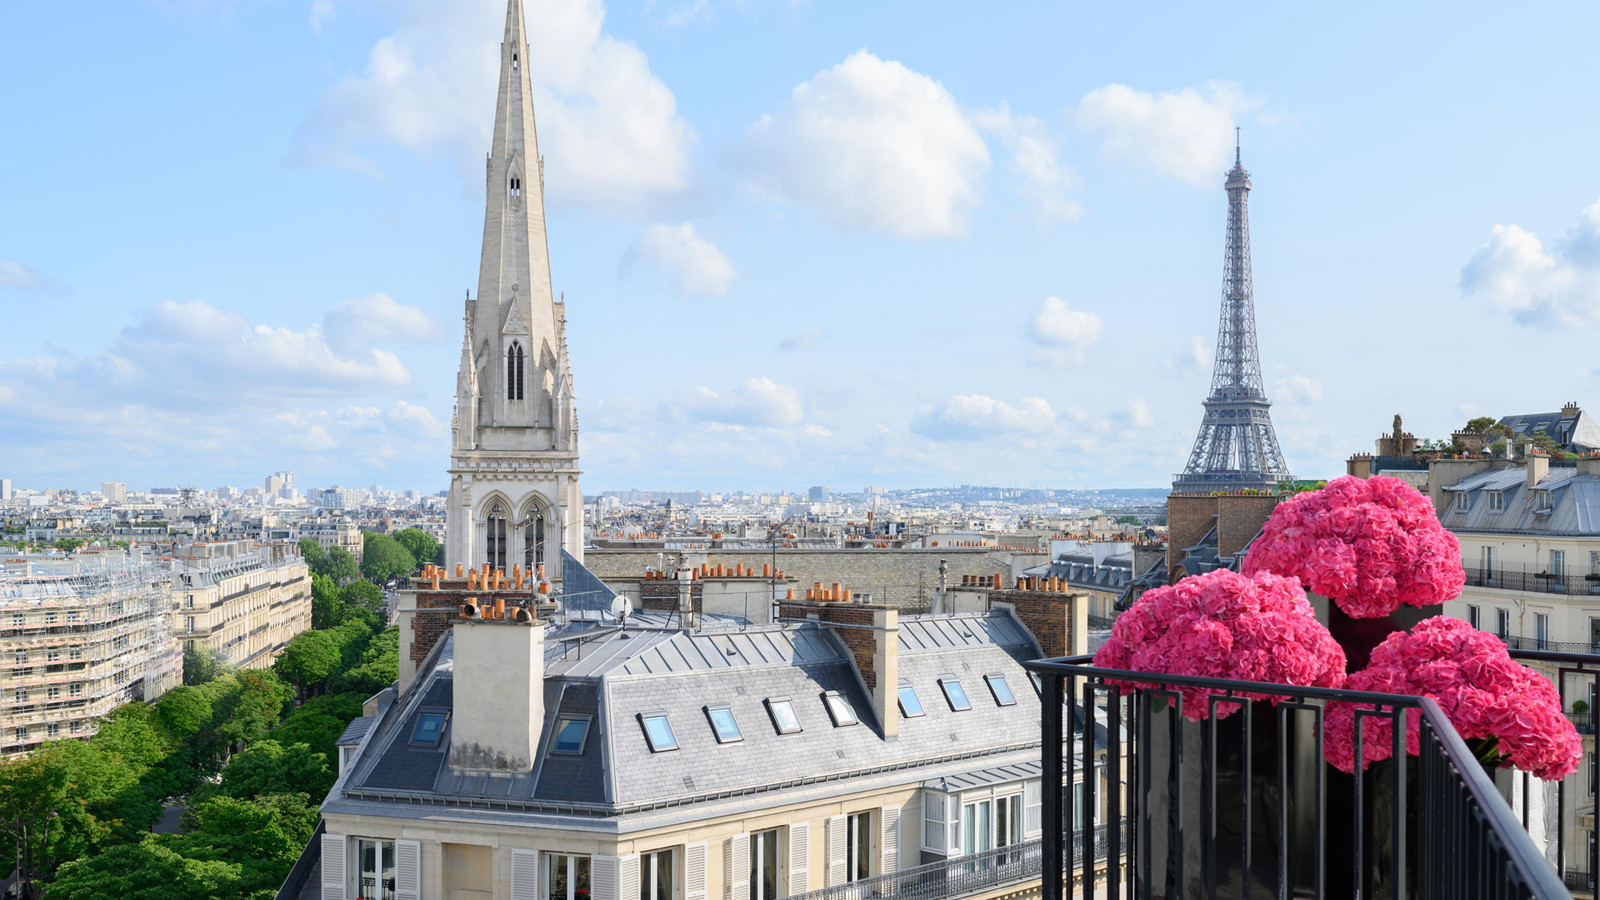 news-main-four-seasons-hotel-george-v-paris-launches-two-new-suites-flooded-with-natural-light-in-the-heart-of-the-golden-triangle.1561991975.jpg